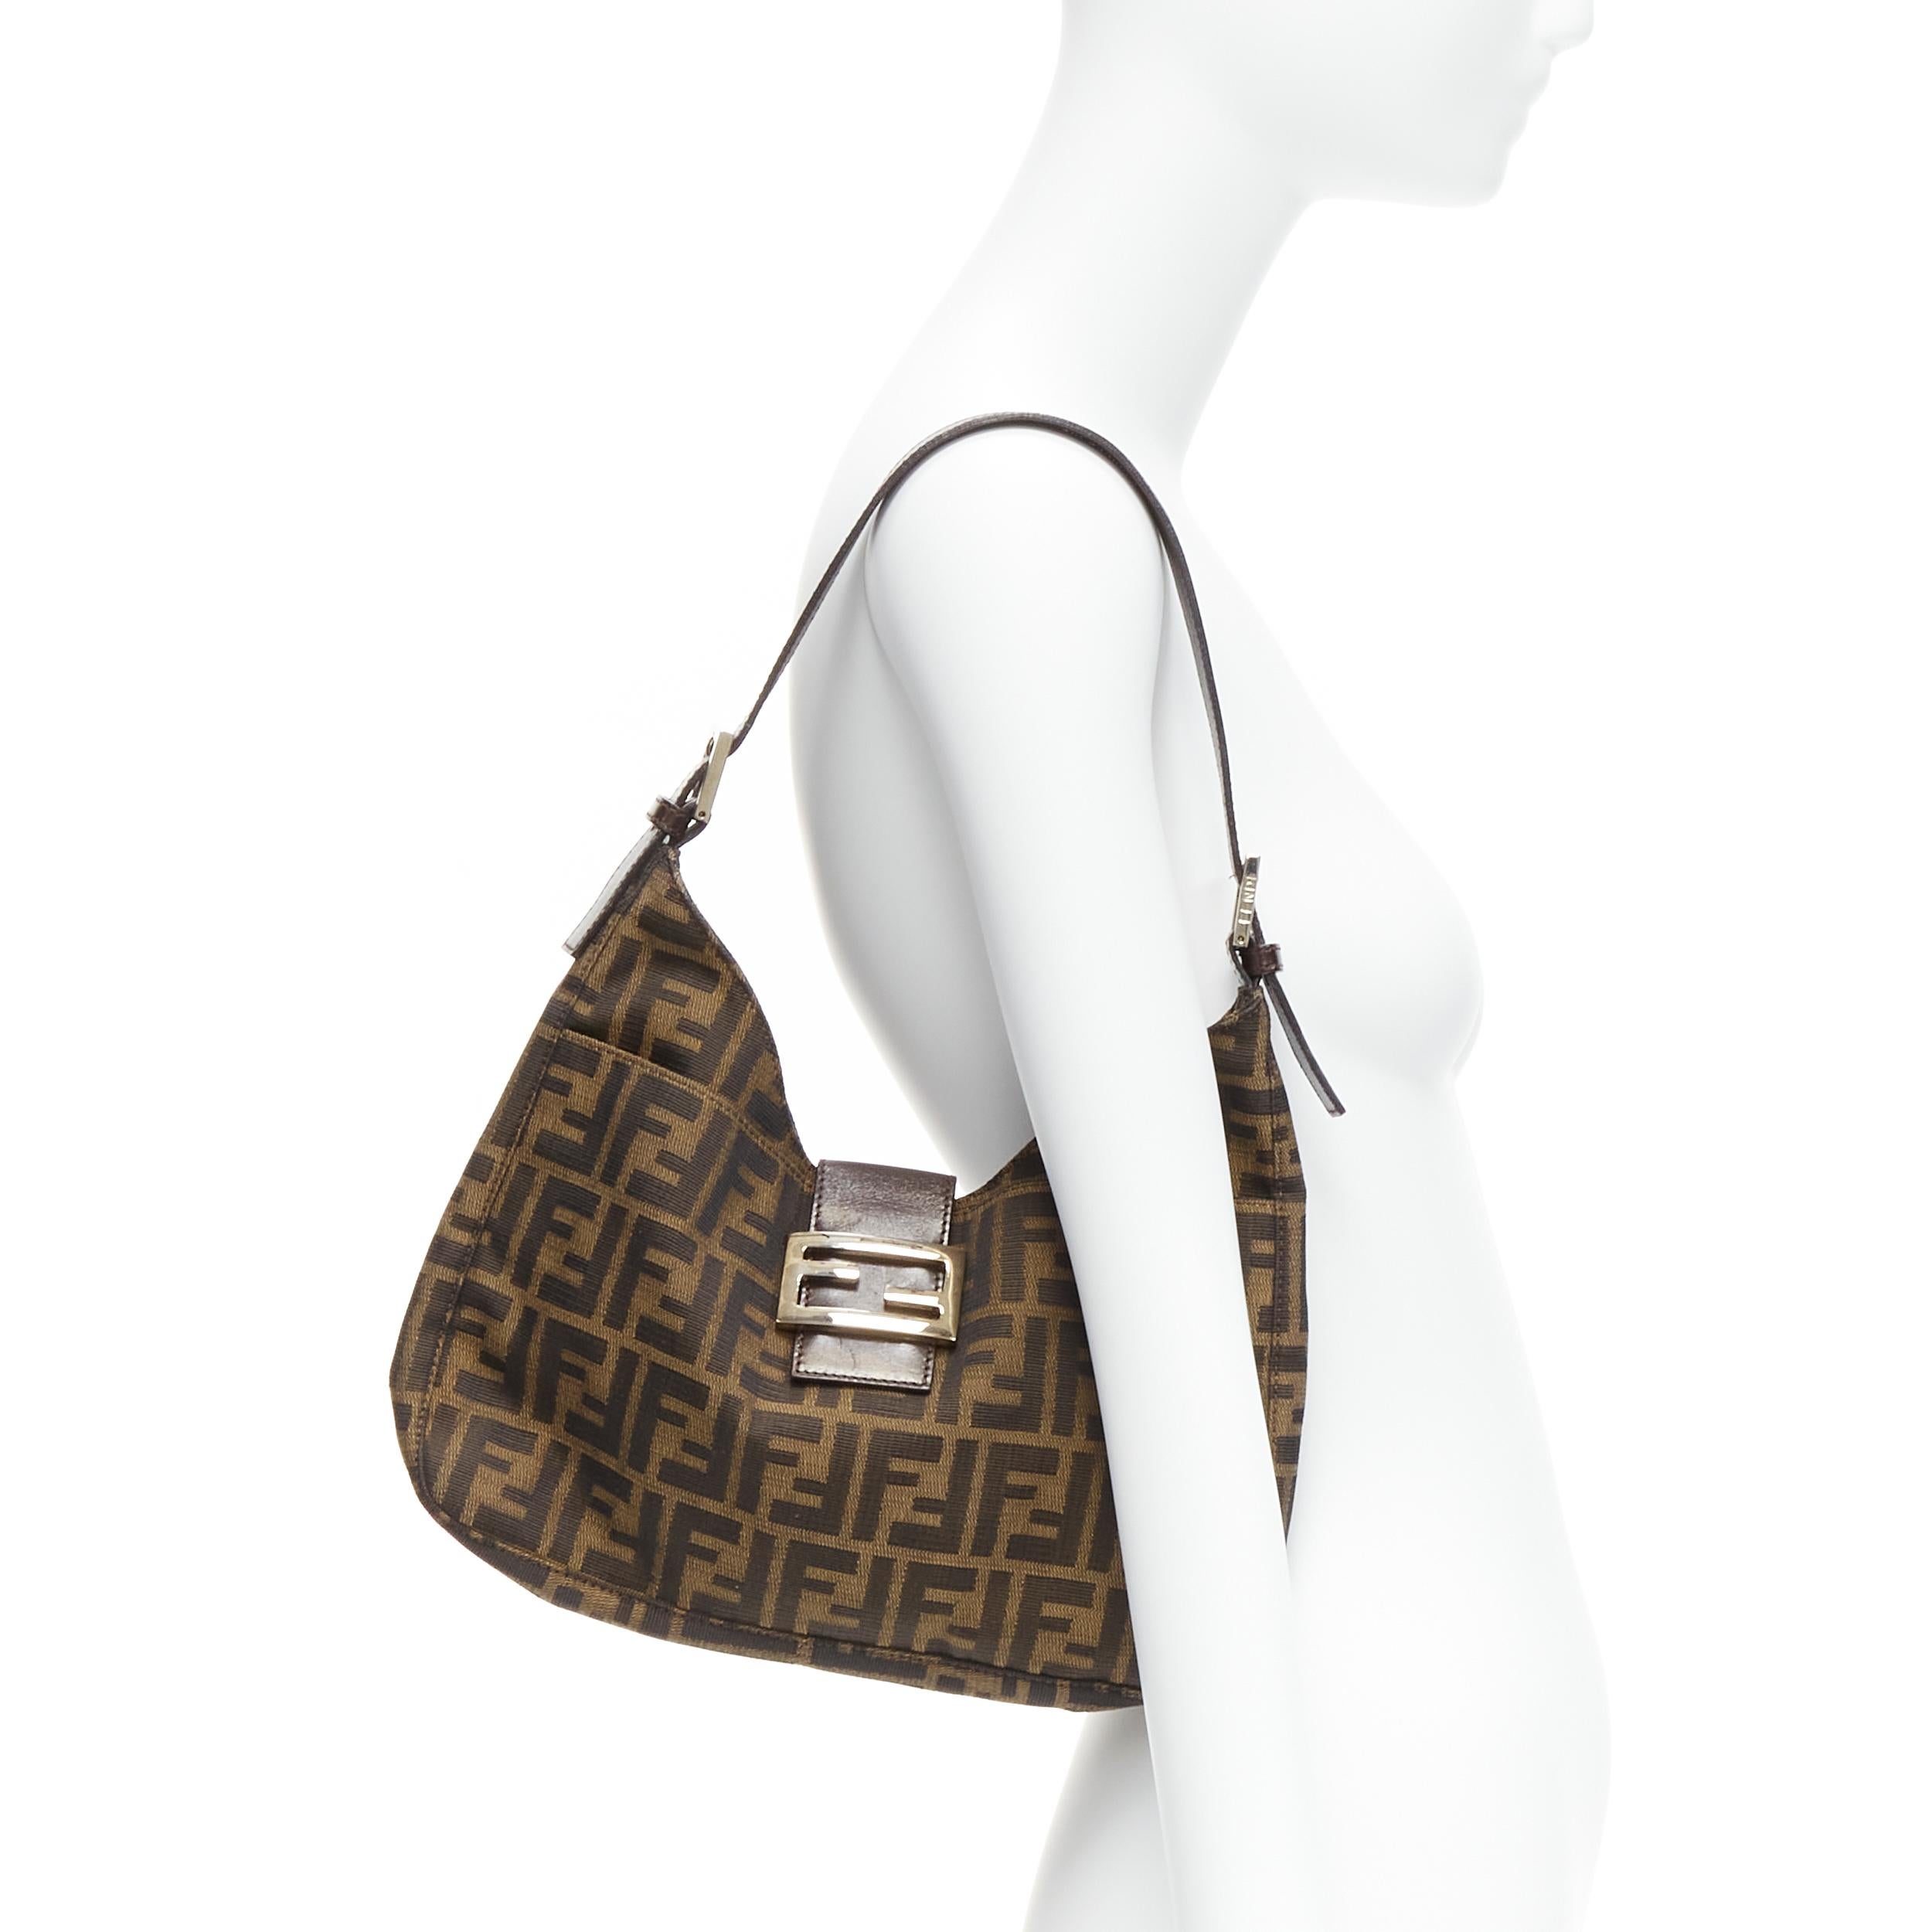 FENDI brown FF Zucca monogram silver buckle top handle underarm hobo bag
Reference: TGAS/C02039
Brand: Fendi
Material: Fabric, Leather, Metal
Color: Brown
Pattern: Monogram
Closure: Snap Buttons
Lining: Brown Fabric
Made in: